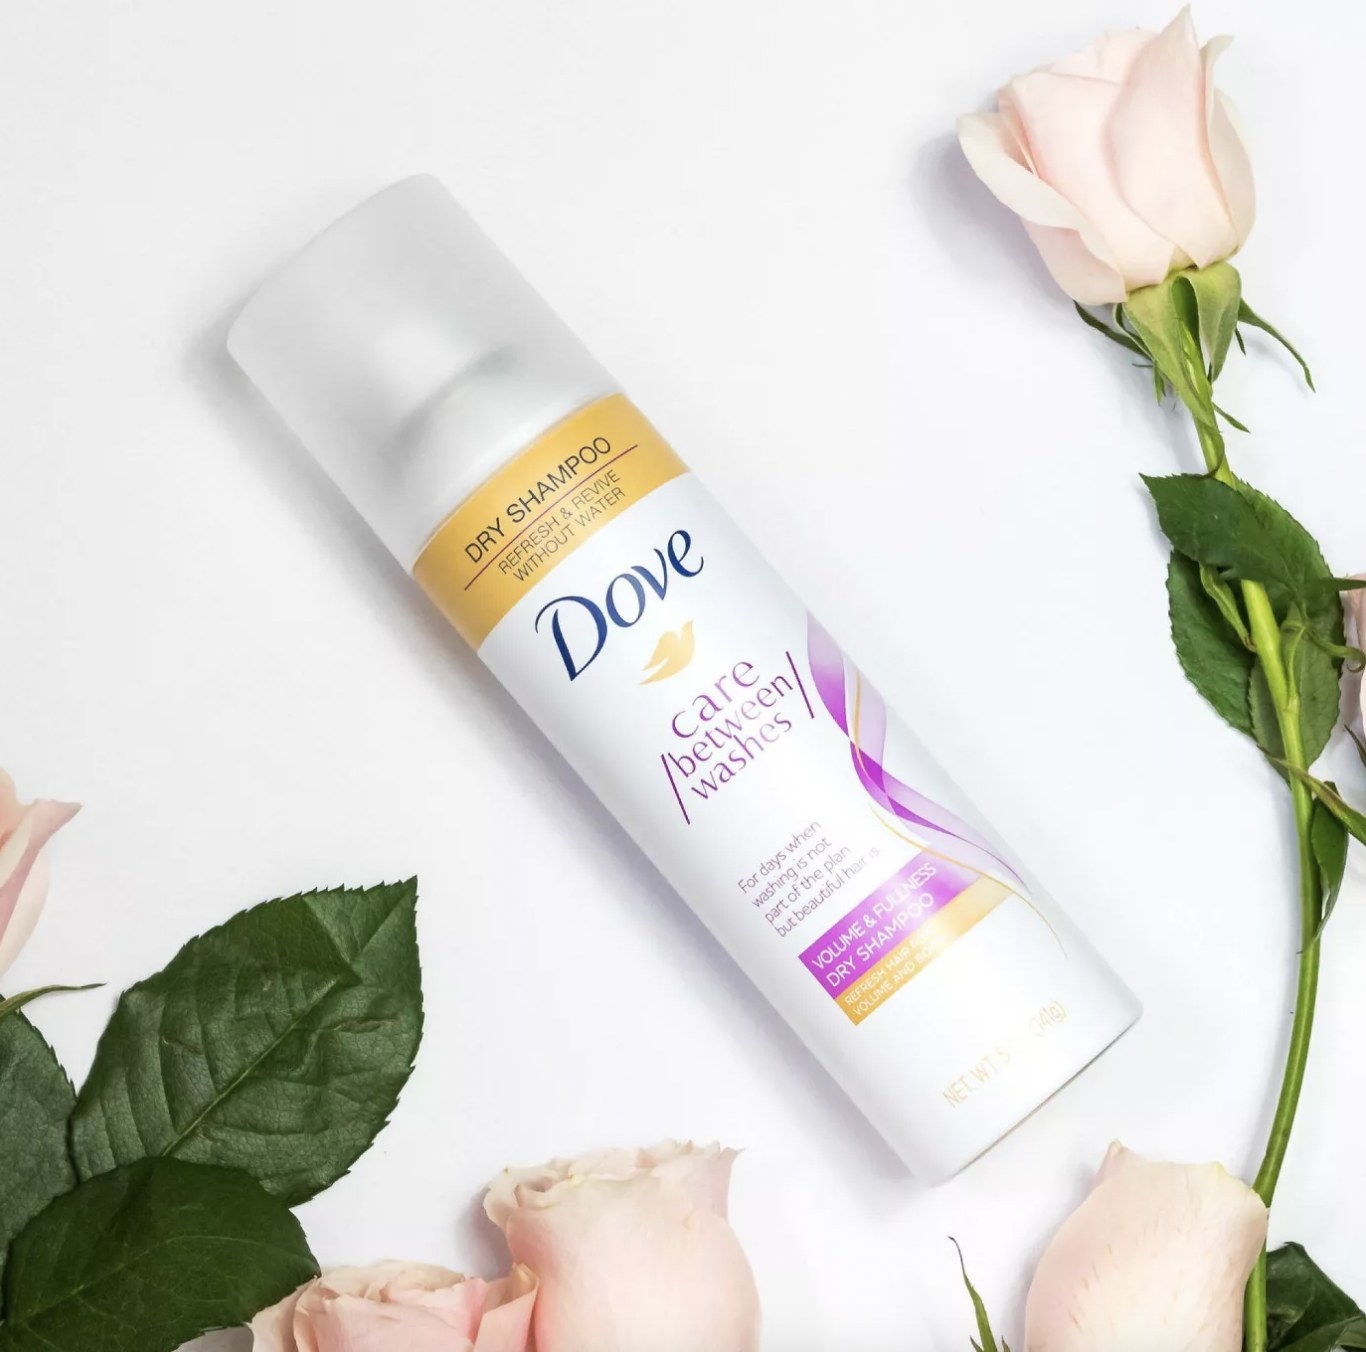 A bottle of dry shampoo and roses